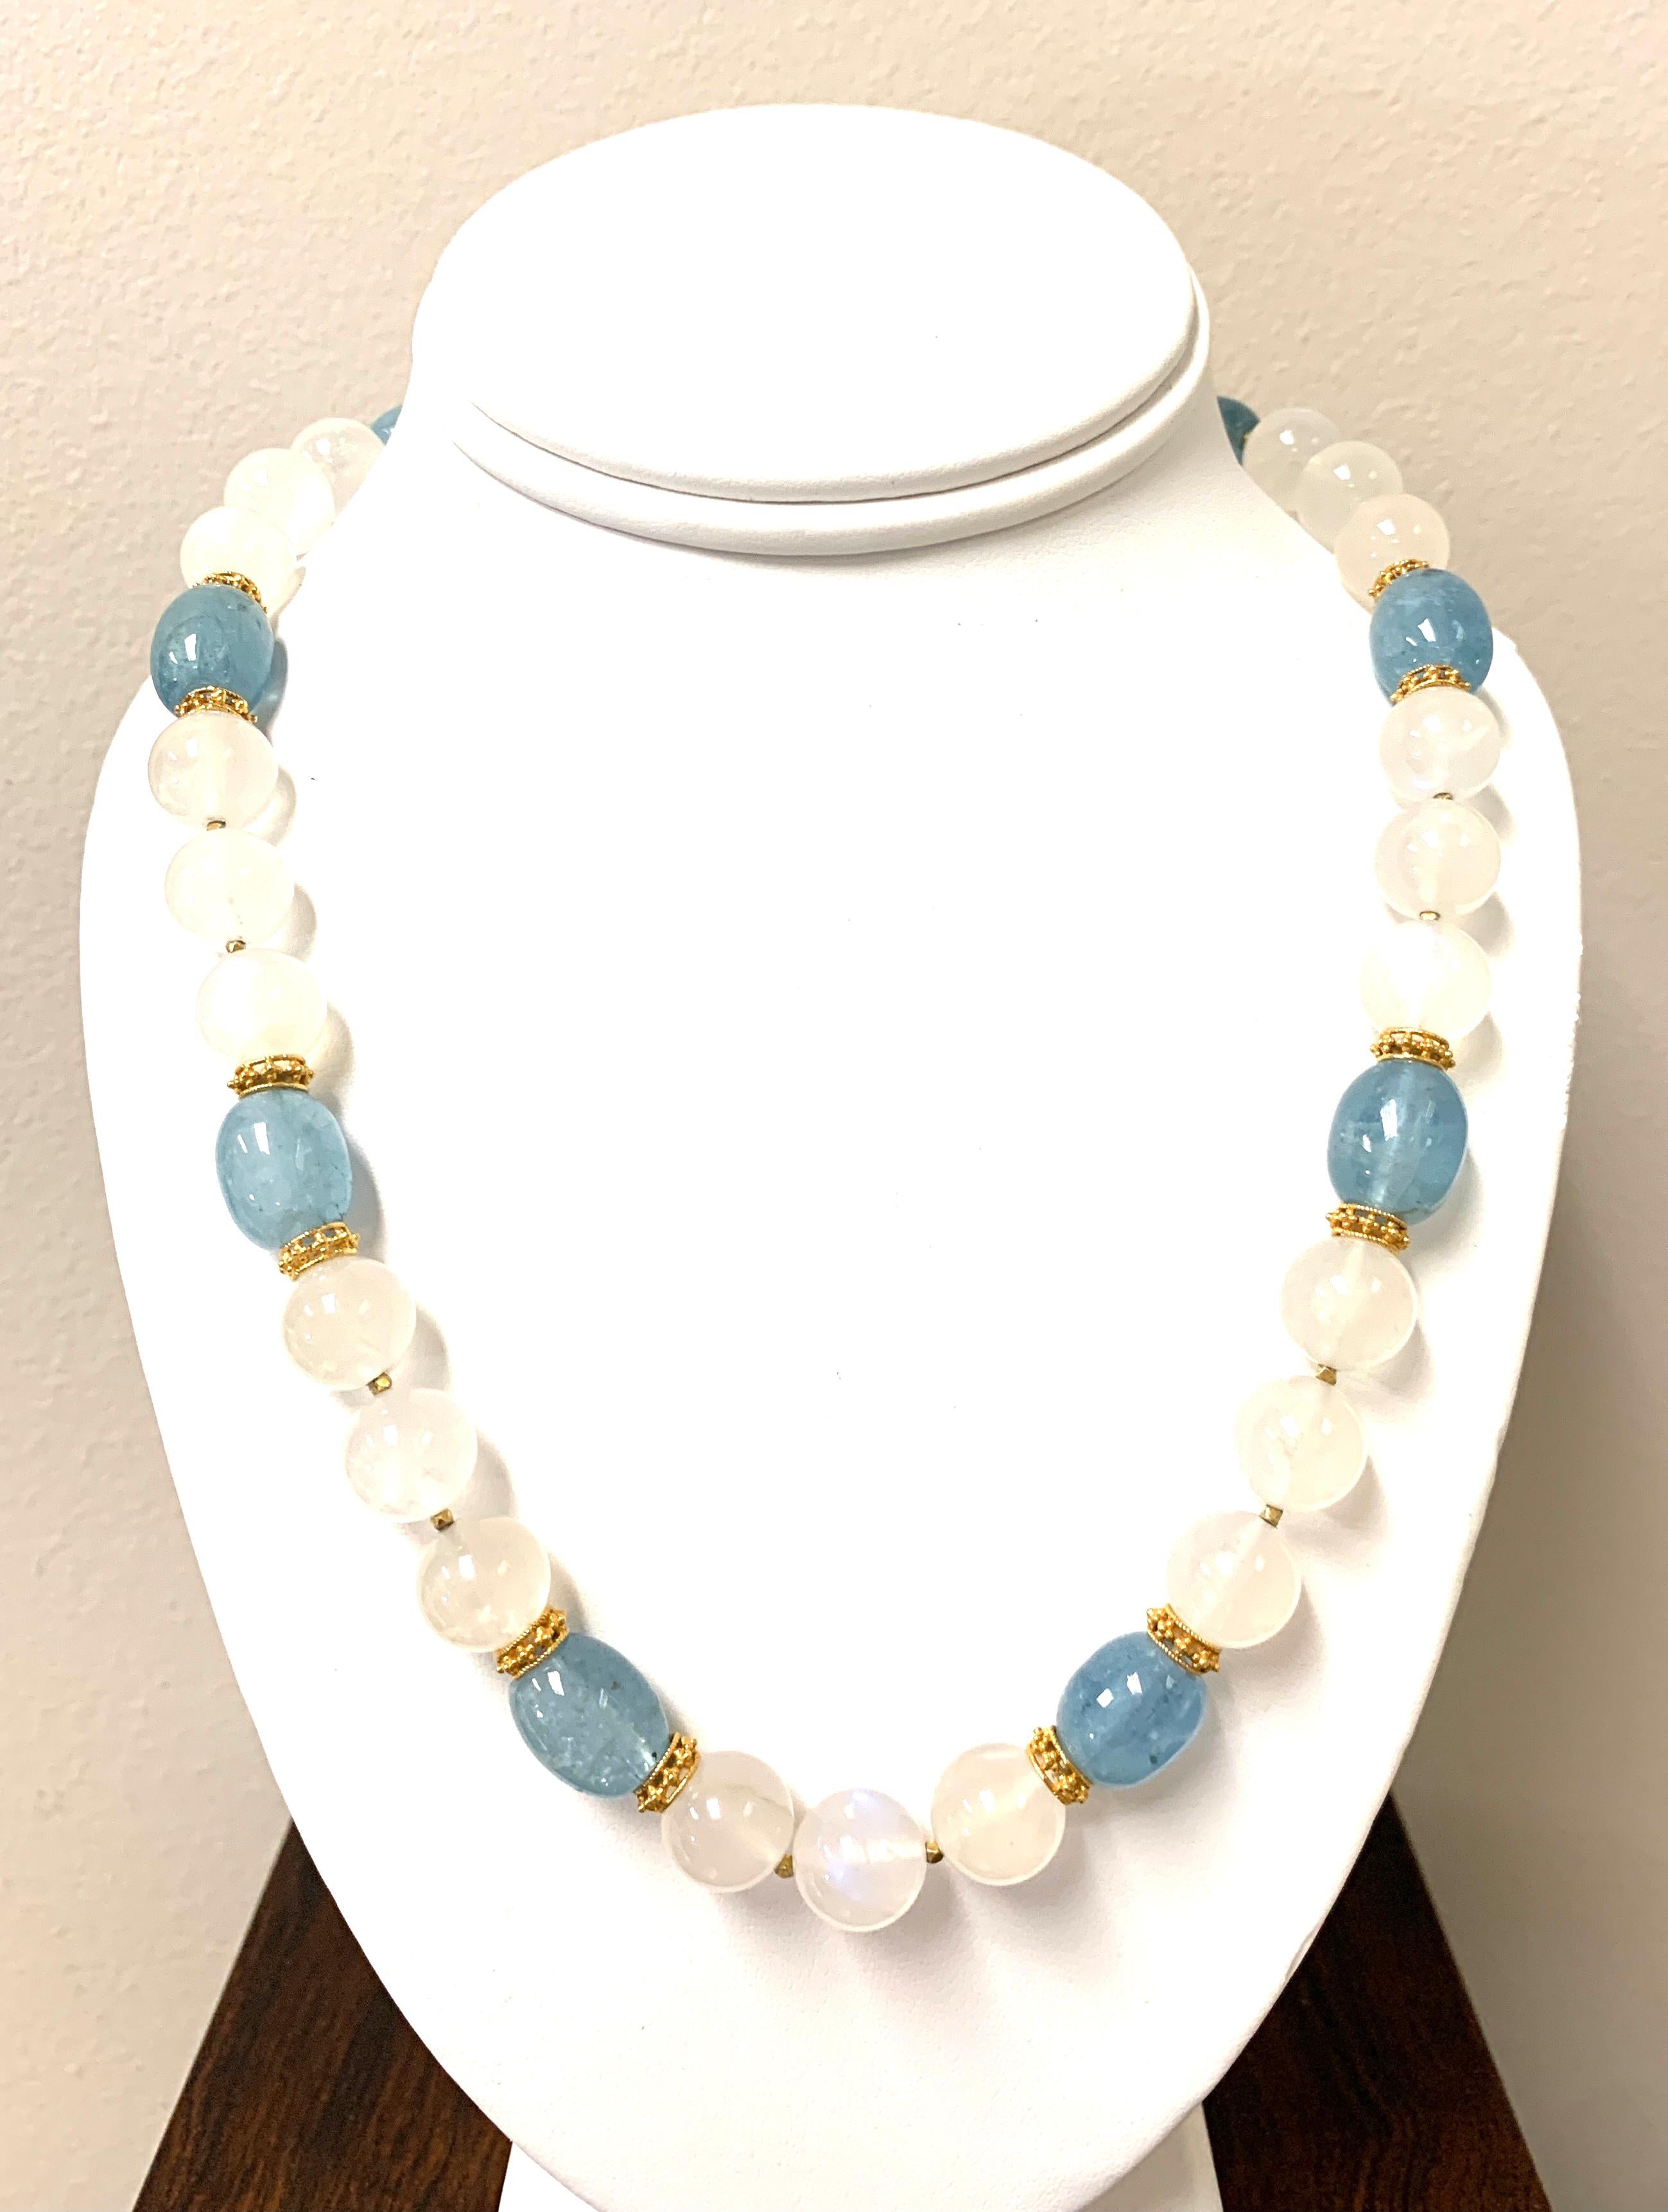 Moonstone Bead and Aquamarine Bead Necklace with Yellow Gold Spacers, 24 Inches 1